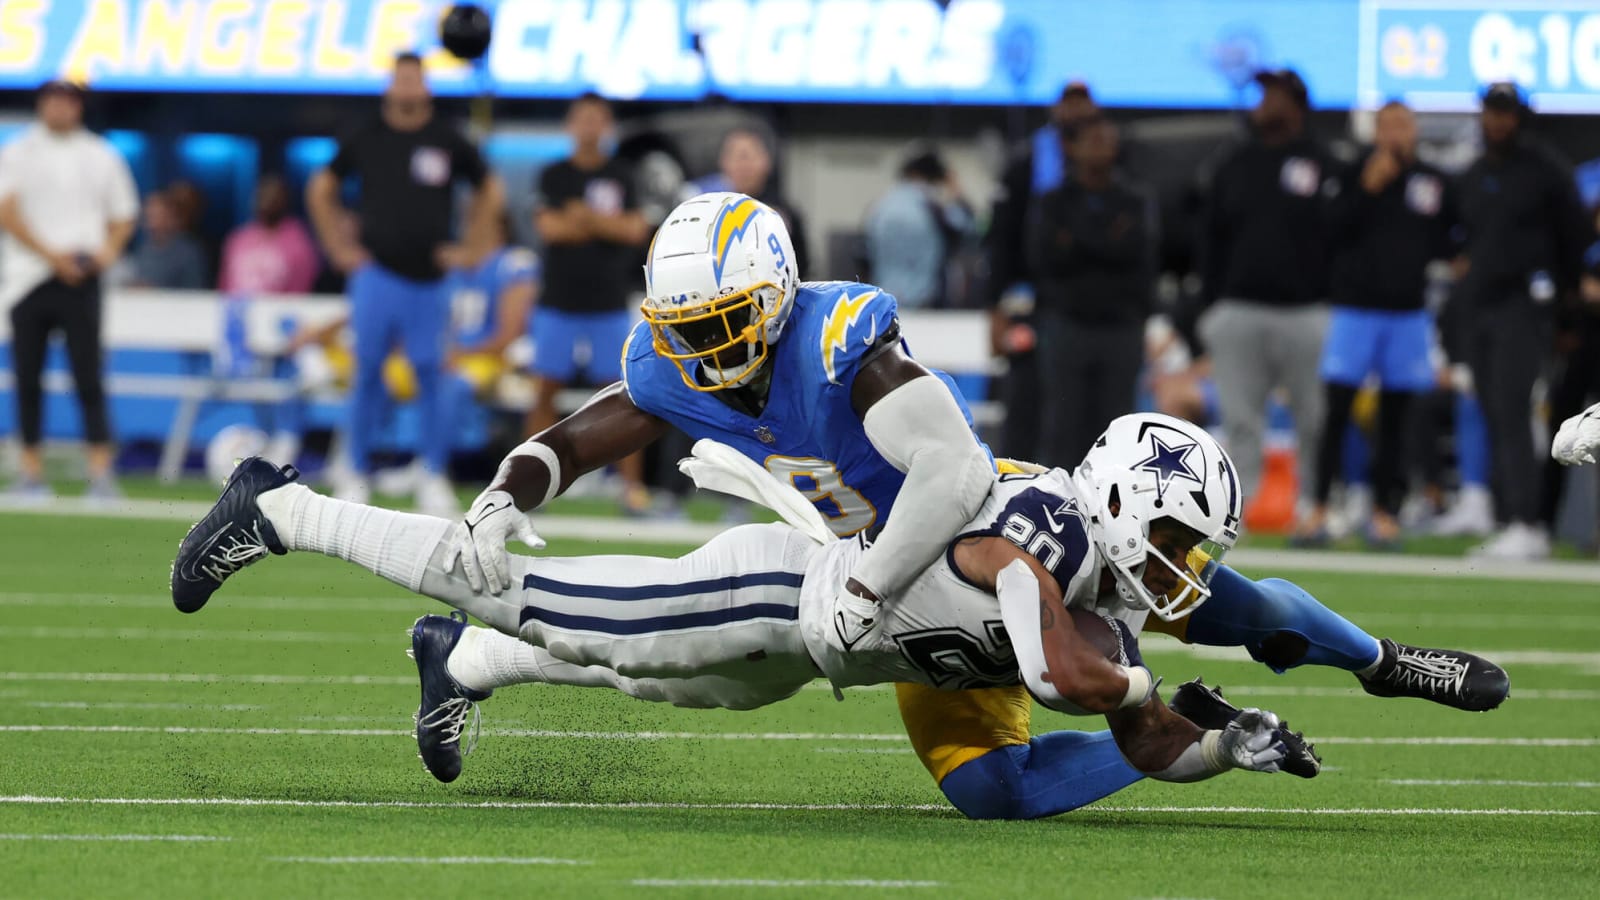 Watch: Chargers recover fumble after wild sequence on punt return